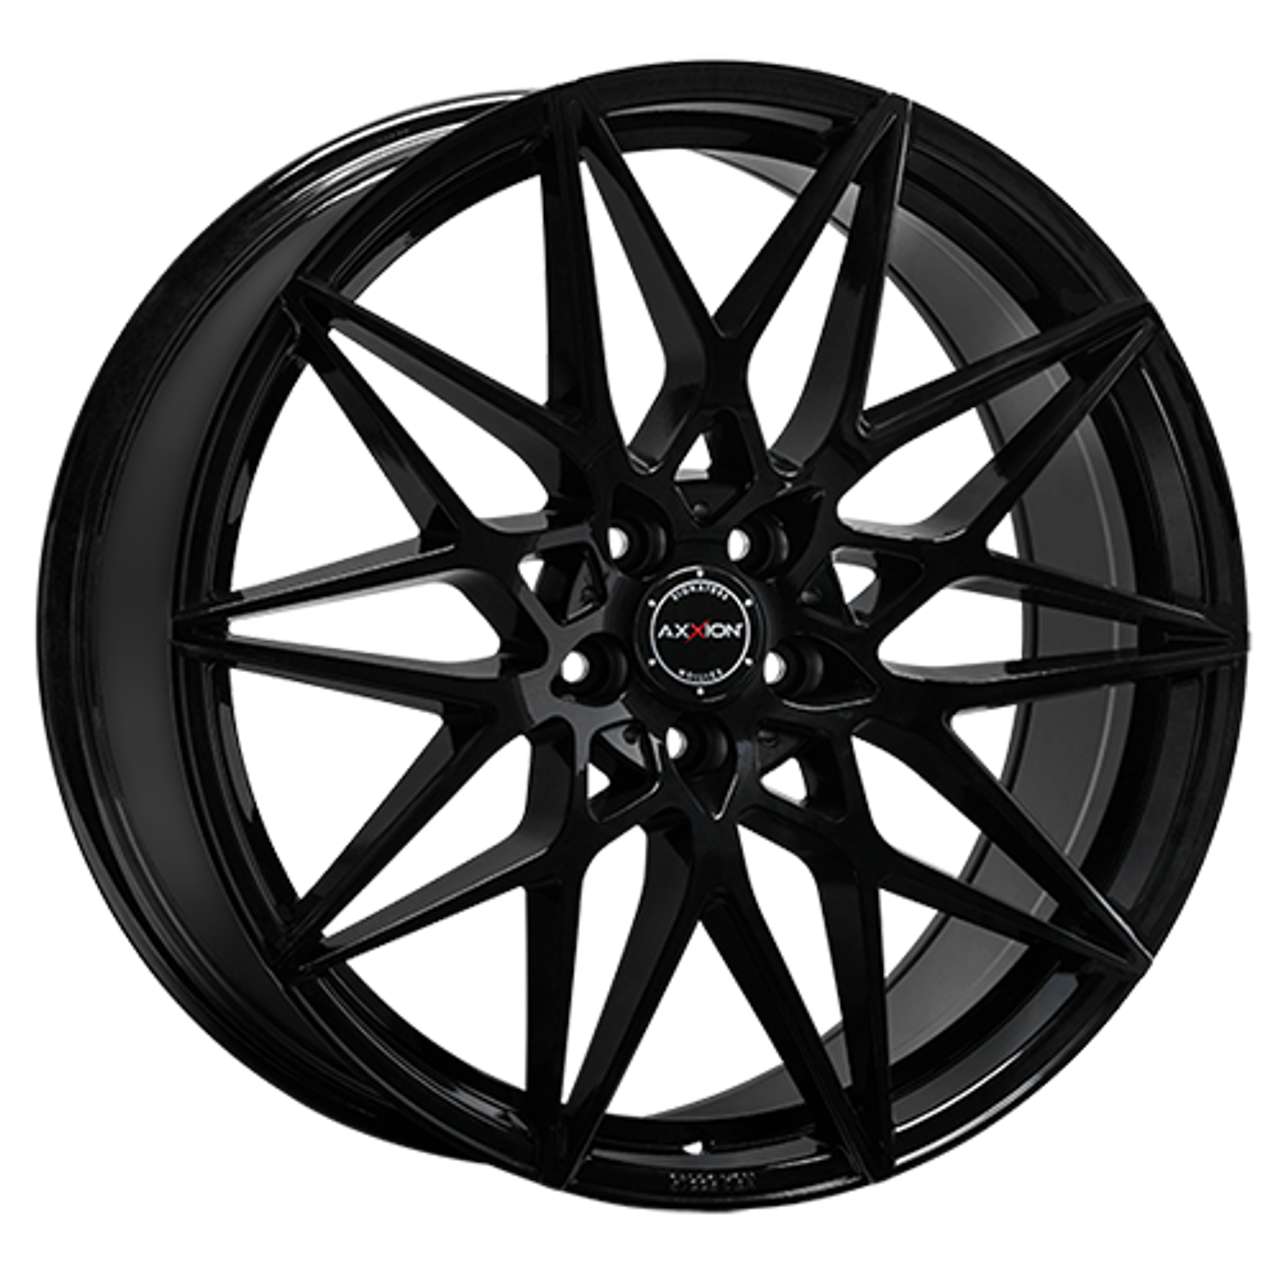 AXXION AX9 black glossy painted 8.5Jx19 5x114 ET45